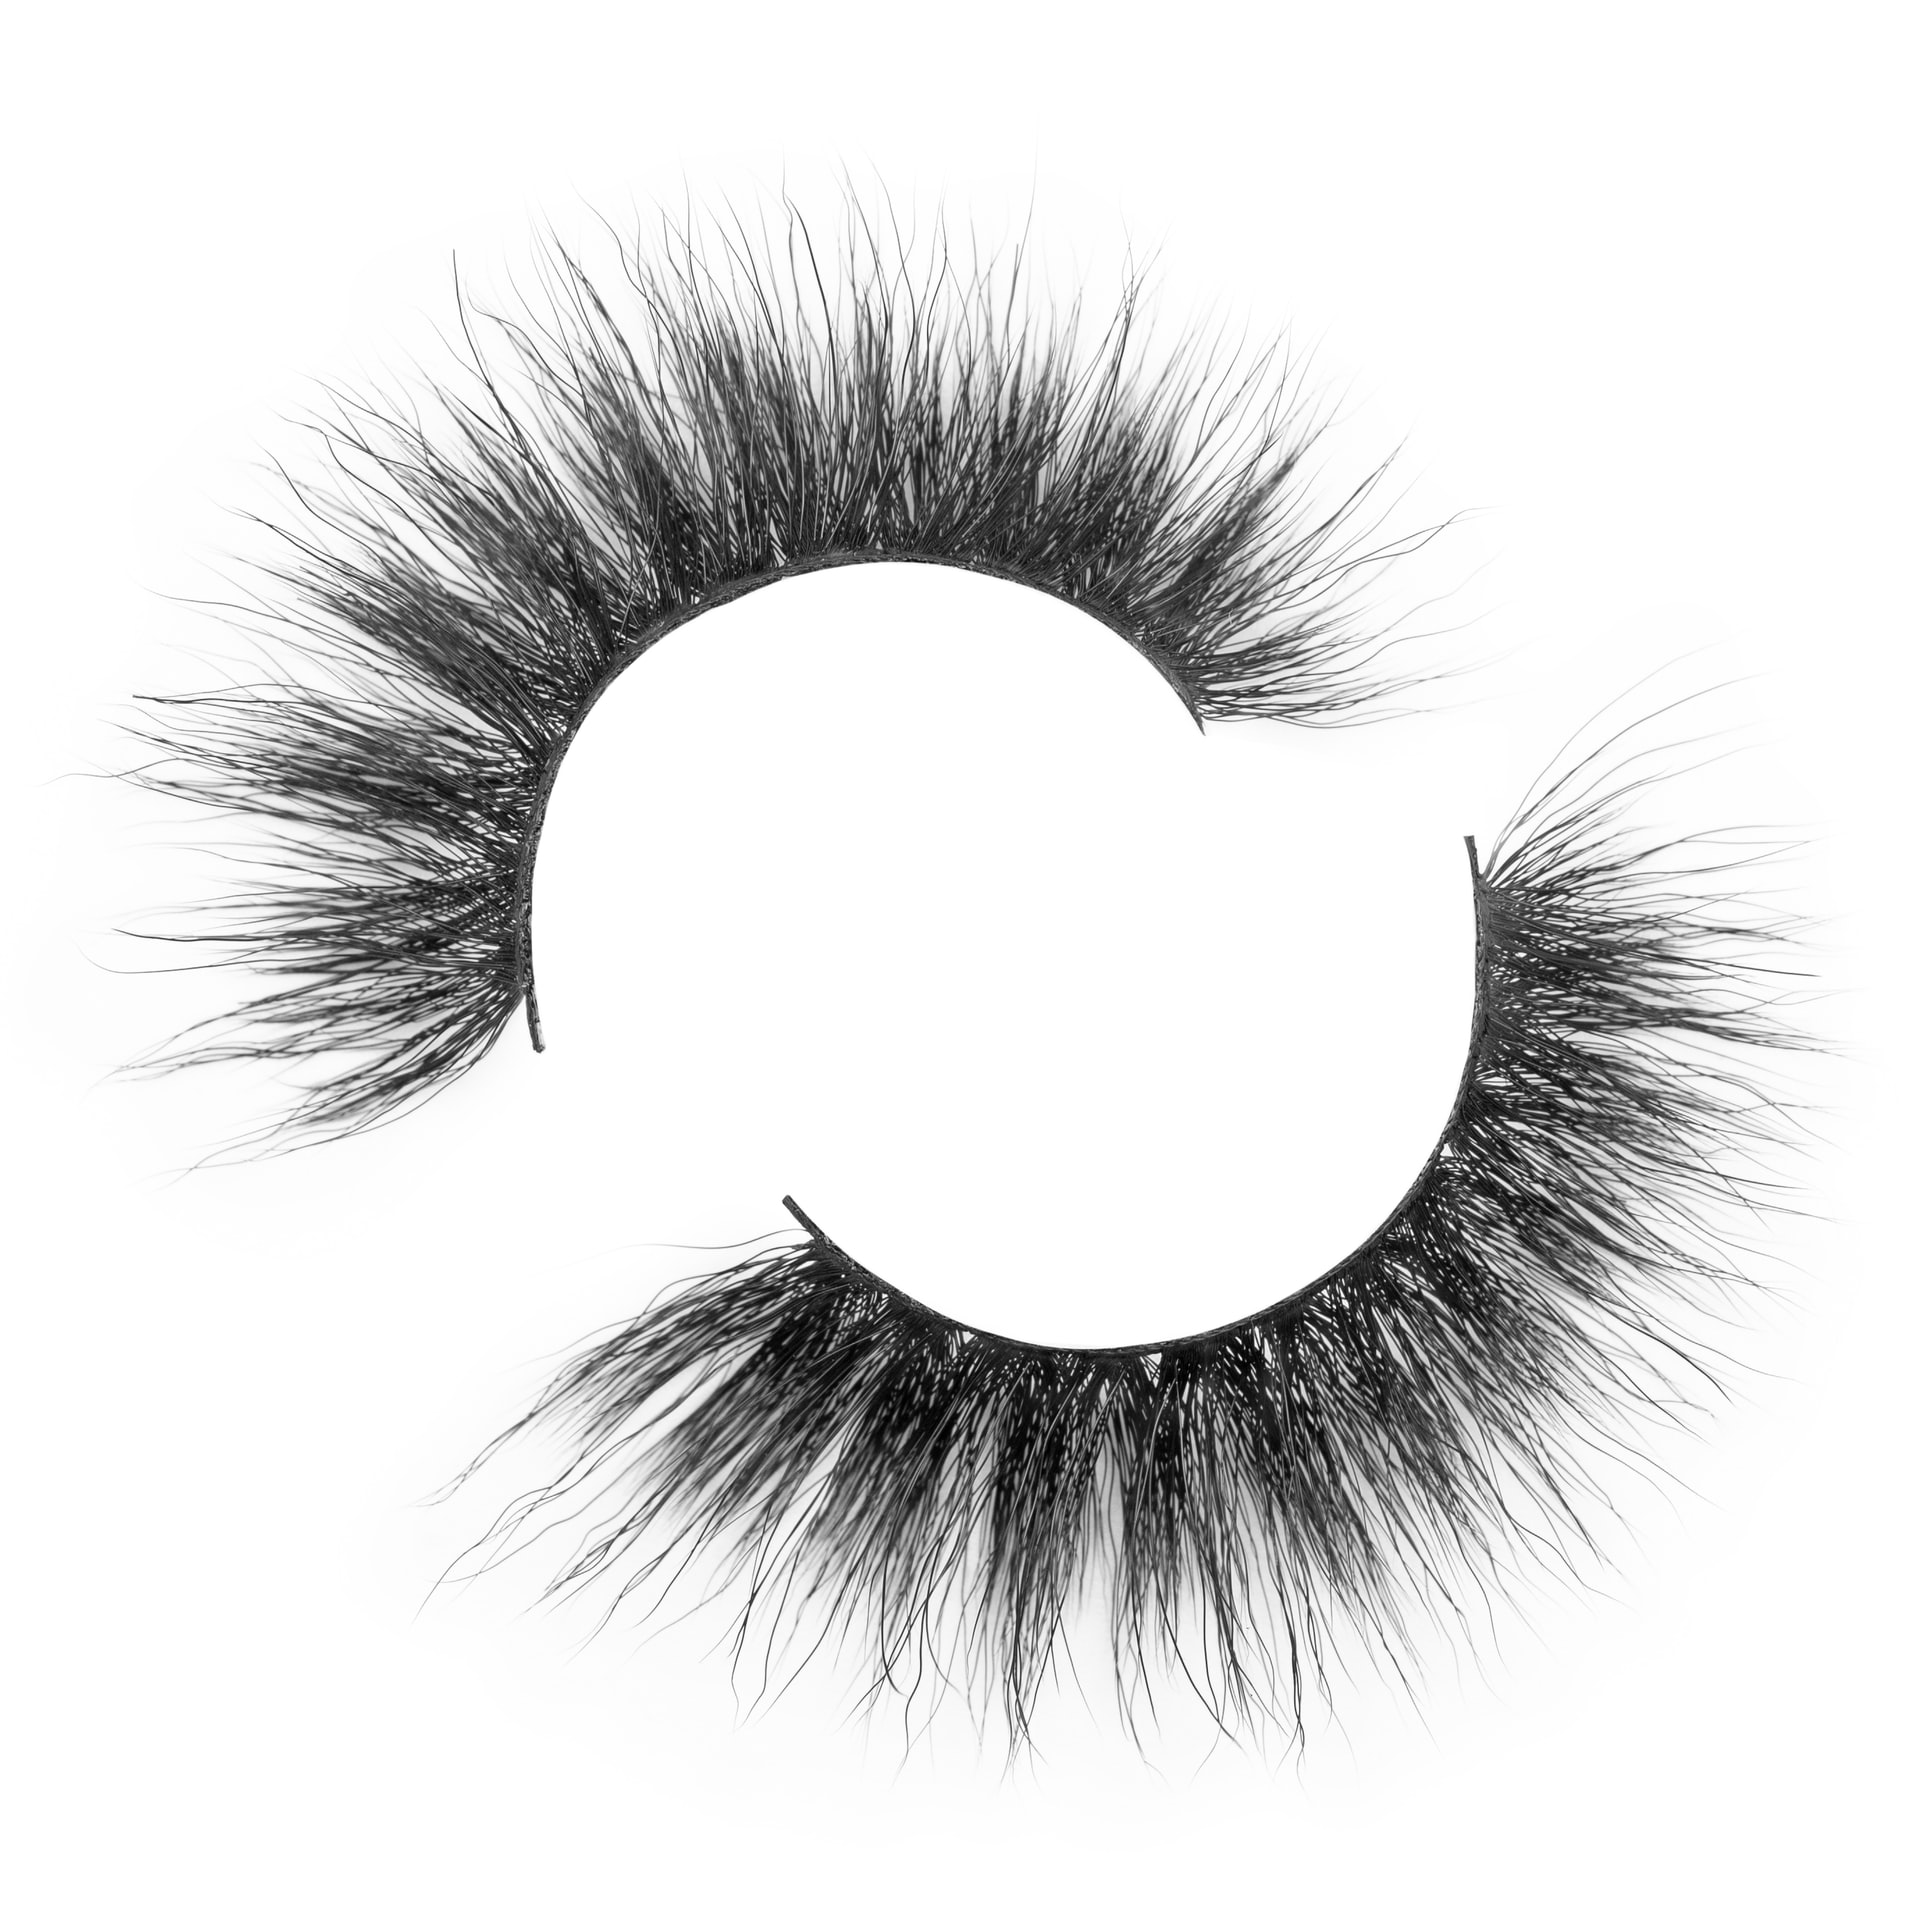 How To Clean Magnetic Eyelashes?